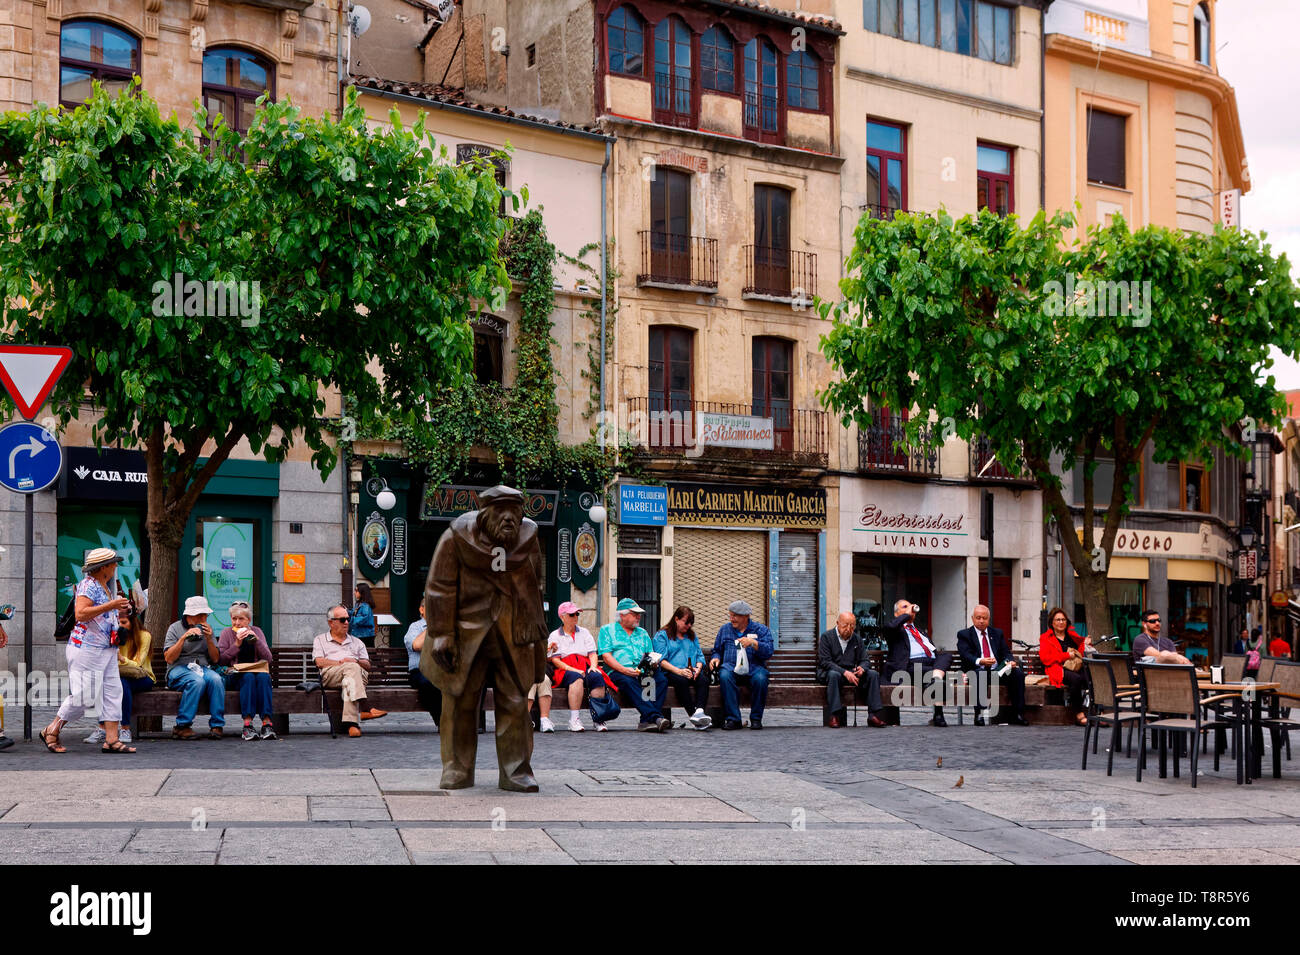 city scene; people sitting, statue, old buildings, shops, table, chairs; UNESCO site; Europe; Salamanca; Spain; spring, horizontal Stock Photo